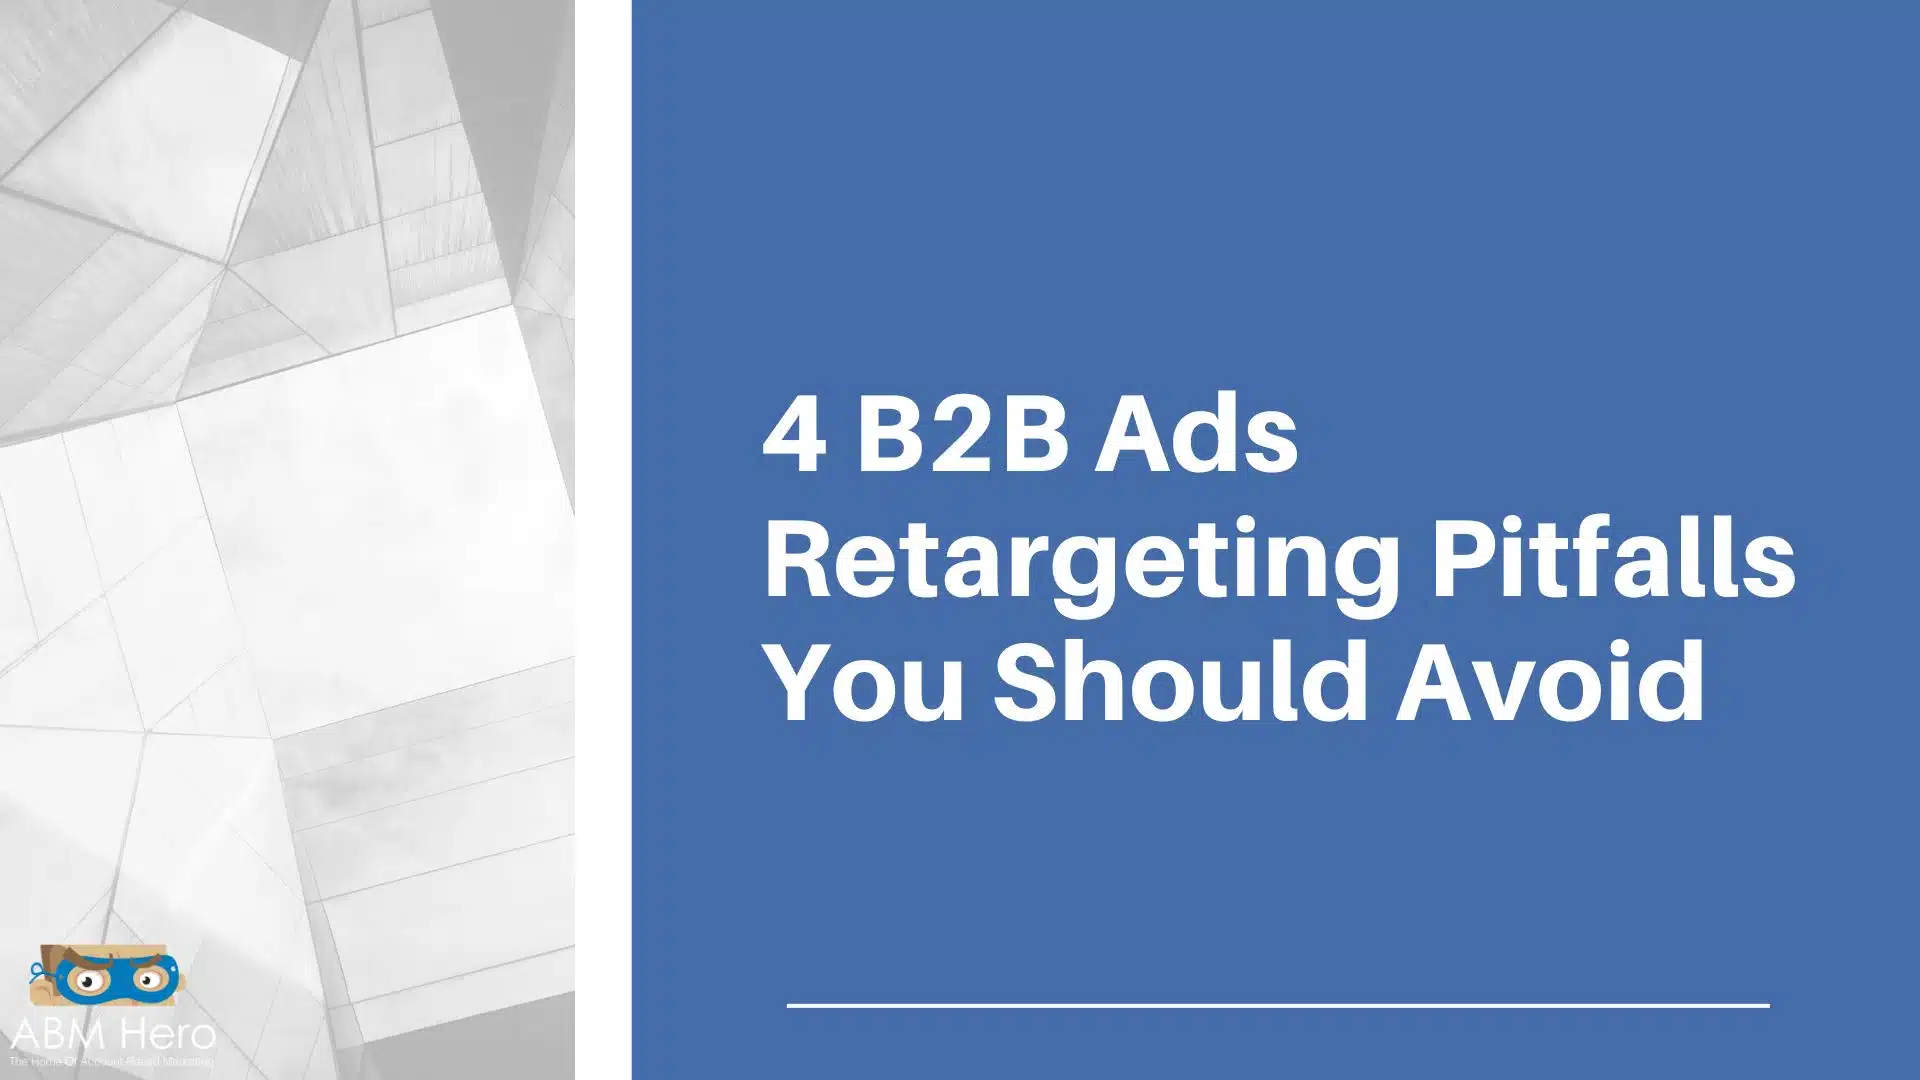 You are currently viewing 4 B2B Ads Retargeting Pitfalls You Should Avoid